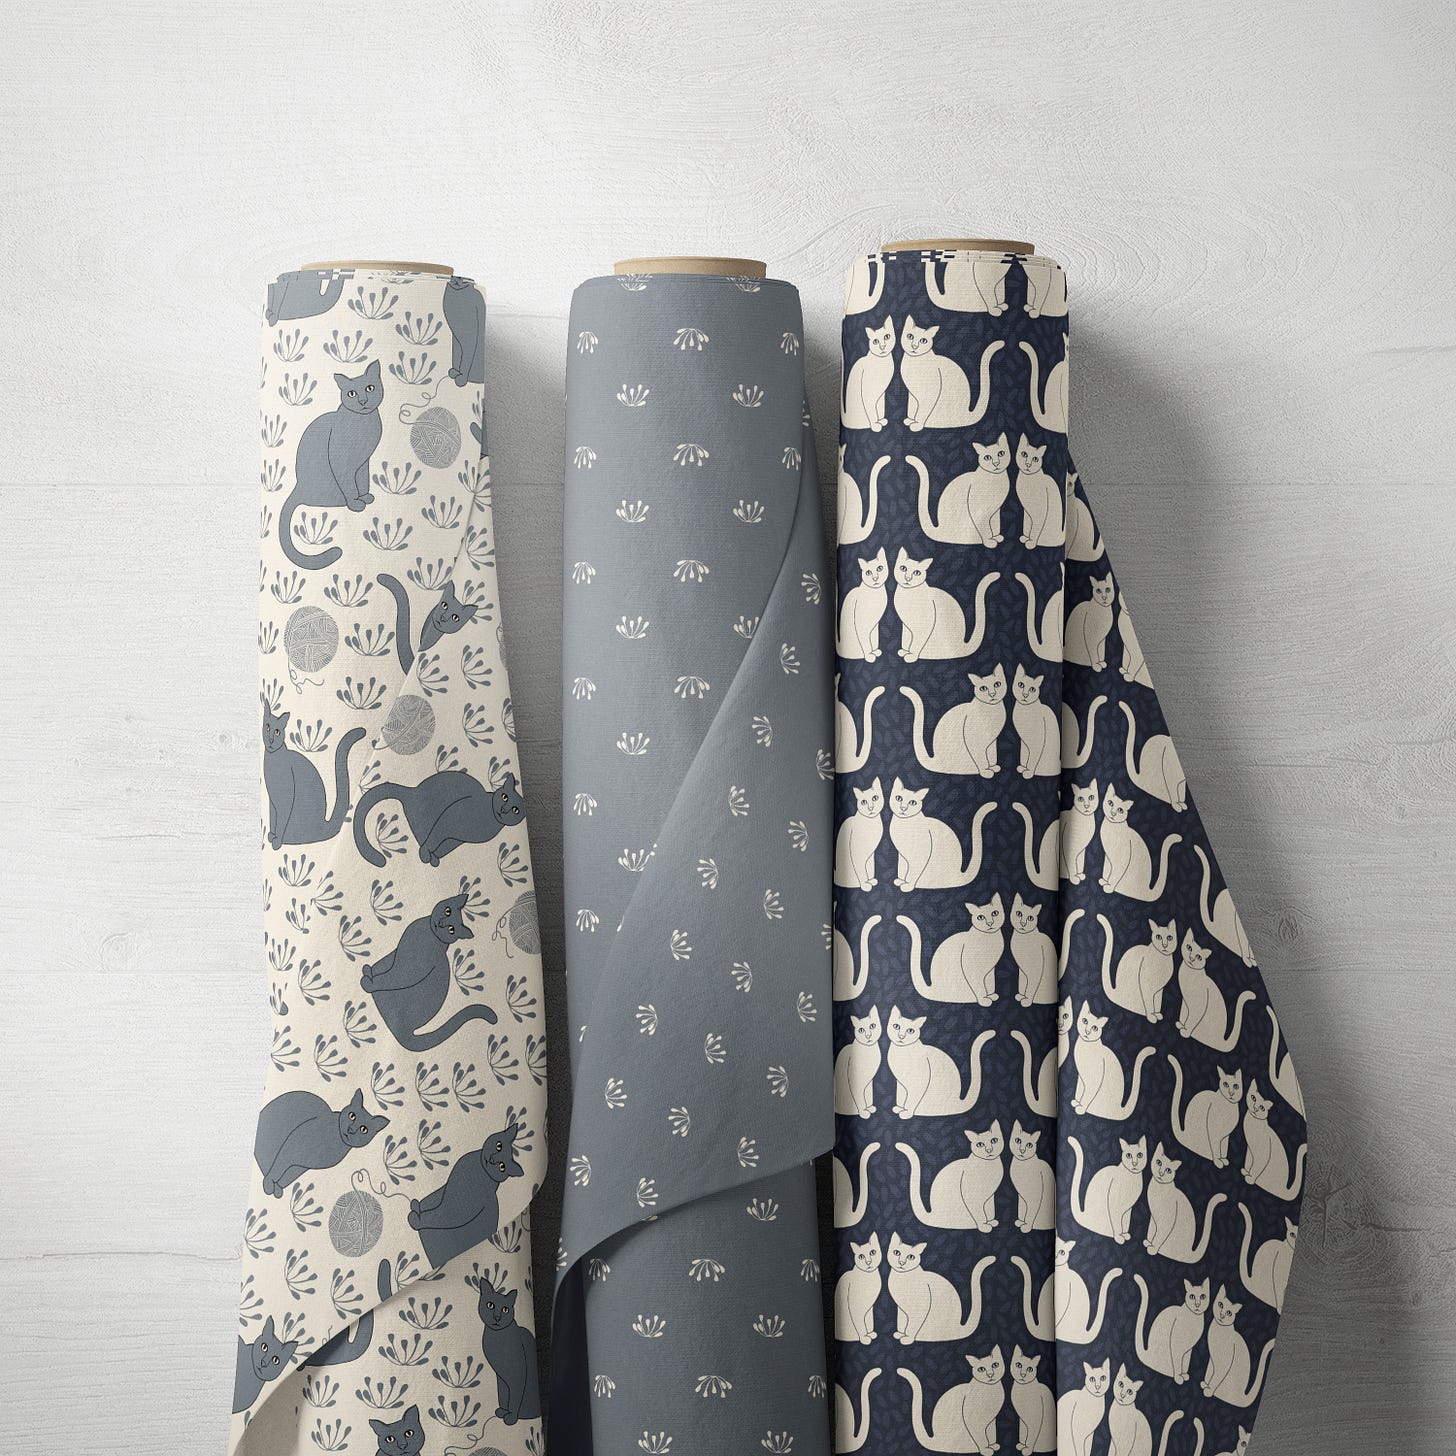 Photograph of three fabric rolls leaning upright against the wall. The left fabric roll depicts a pattern of slate grey cats on a white background, playing with yarn in a field of grasses. The center fabric roll is a coordinate pattern, slate grey with  a half-drop botanical pattern. The right fabric roll is a repeat pattern of two seated white cats facing each other, on a dark blue background surrounded by slightly lighter blue paintstrokes.